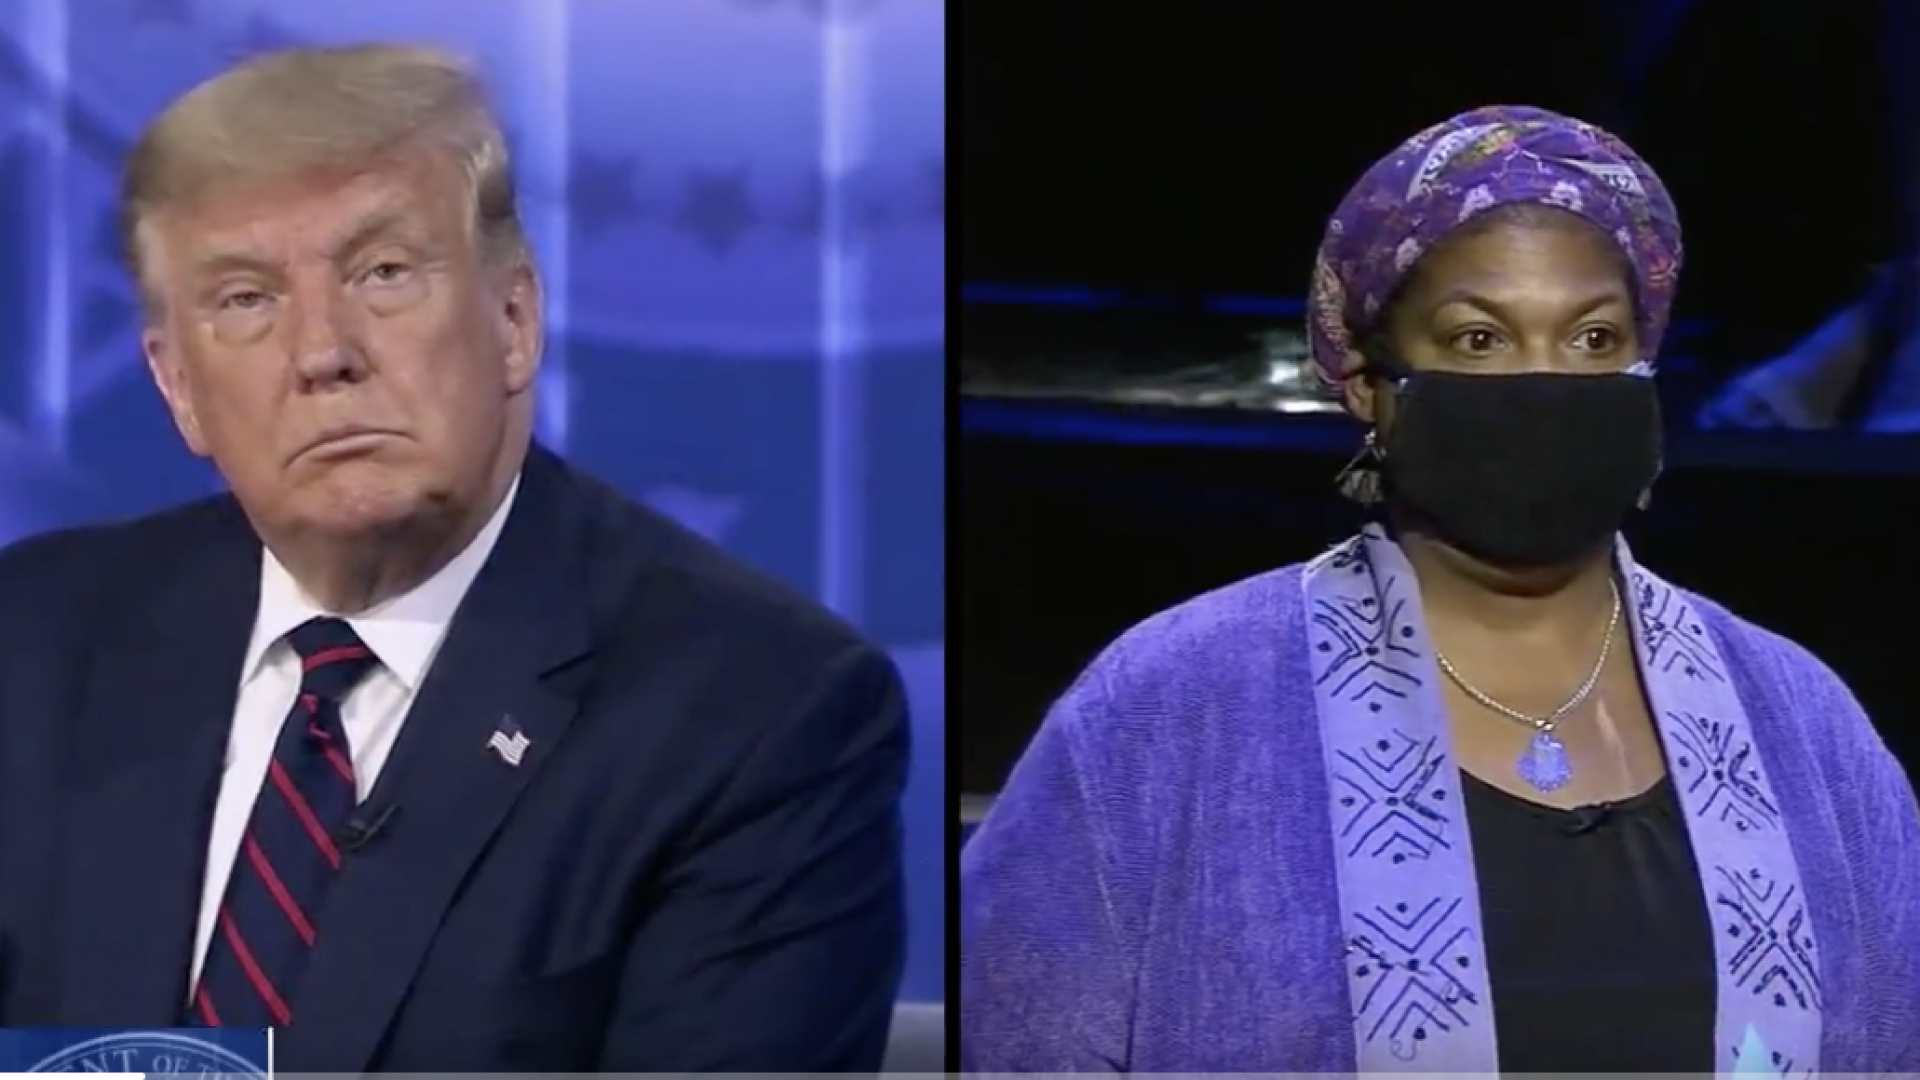 Undecided Black Voters Check Trump During Televised Town Hall